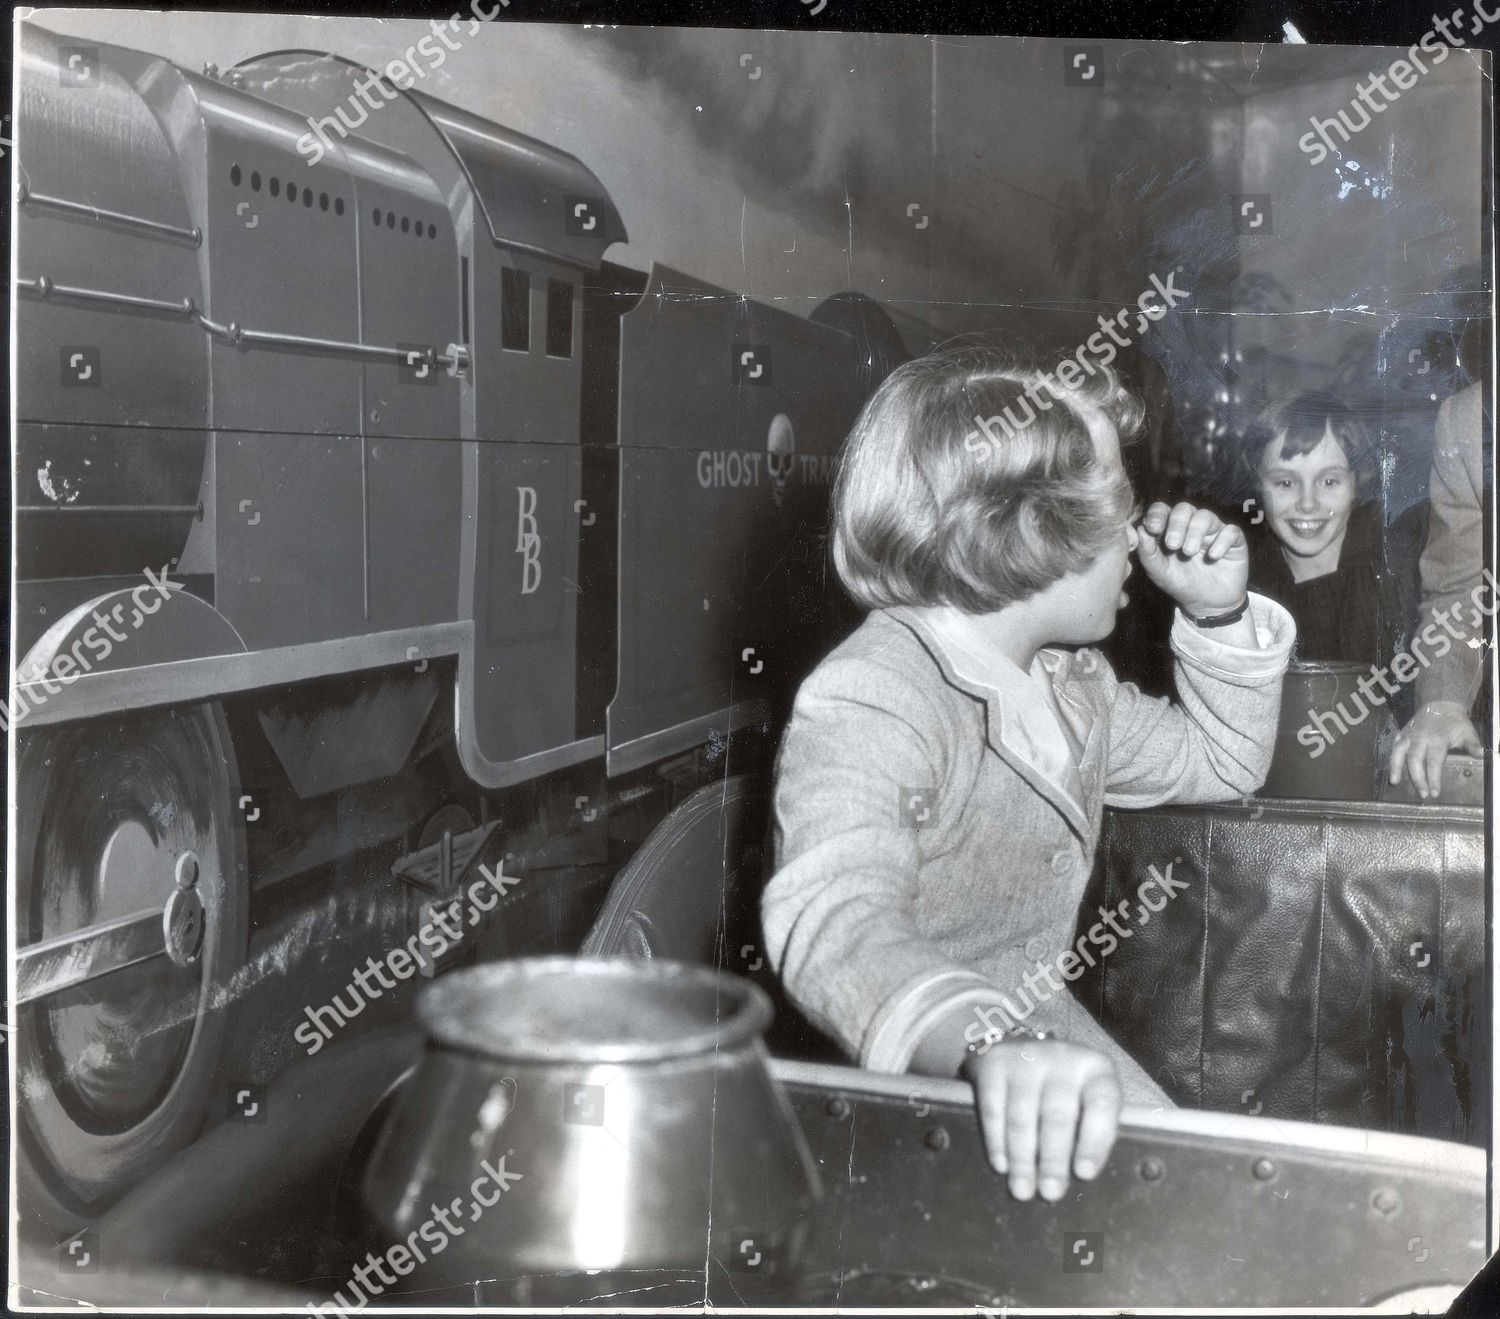 princess-anne-now-princess-royal-1959-picture-shows-princess-anne-on-the-ghost-train-at-bertram-millss-circus-at-the-olympia-shutterstock-editorial-886799a.jpg